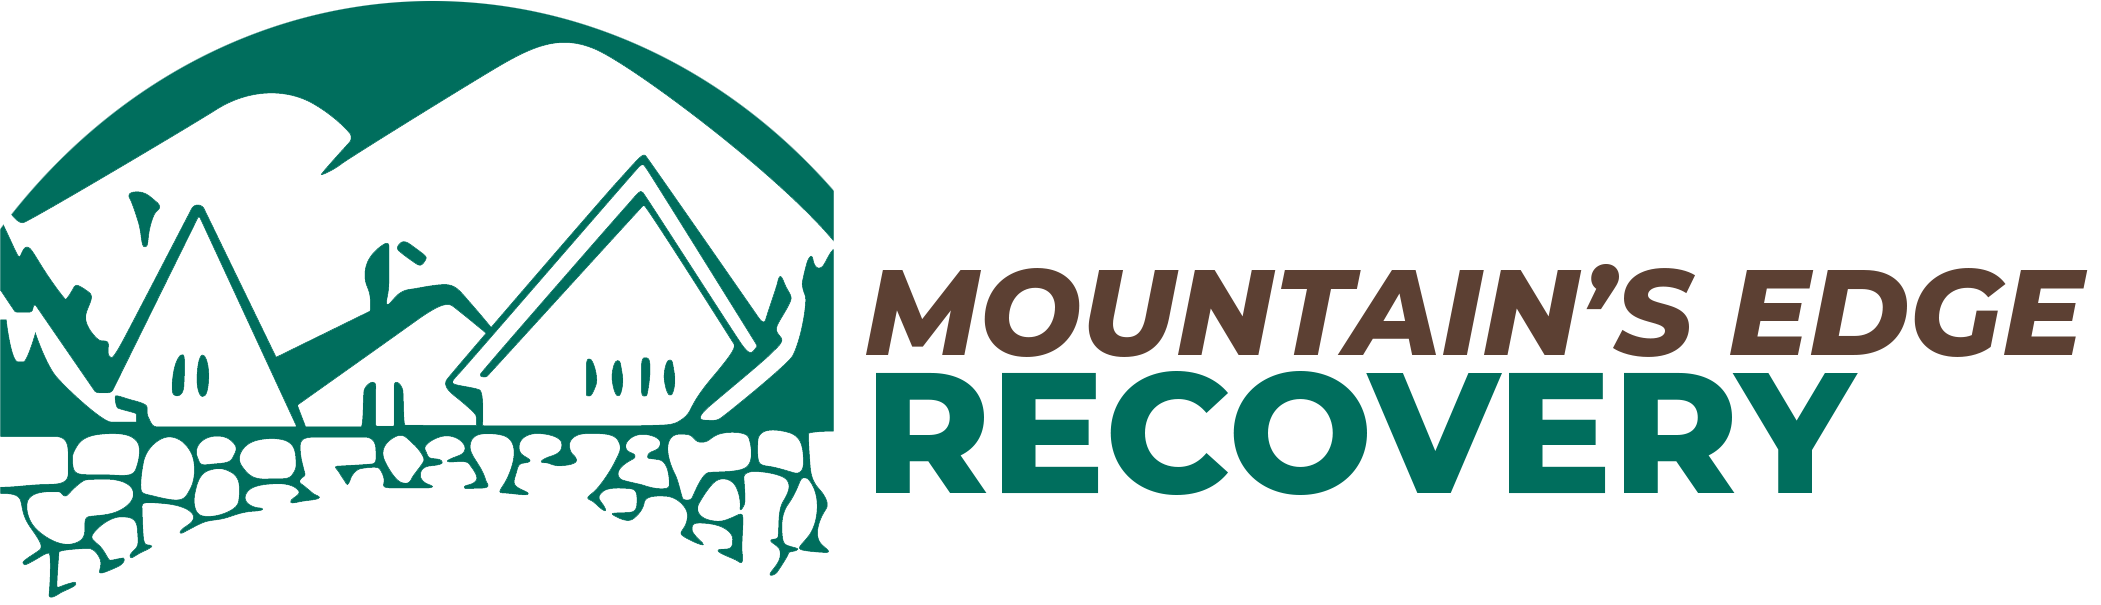 Alcohol Abuse Treatment | Mountains Edge Recovery Center